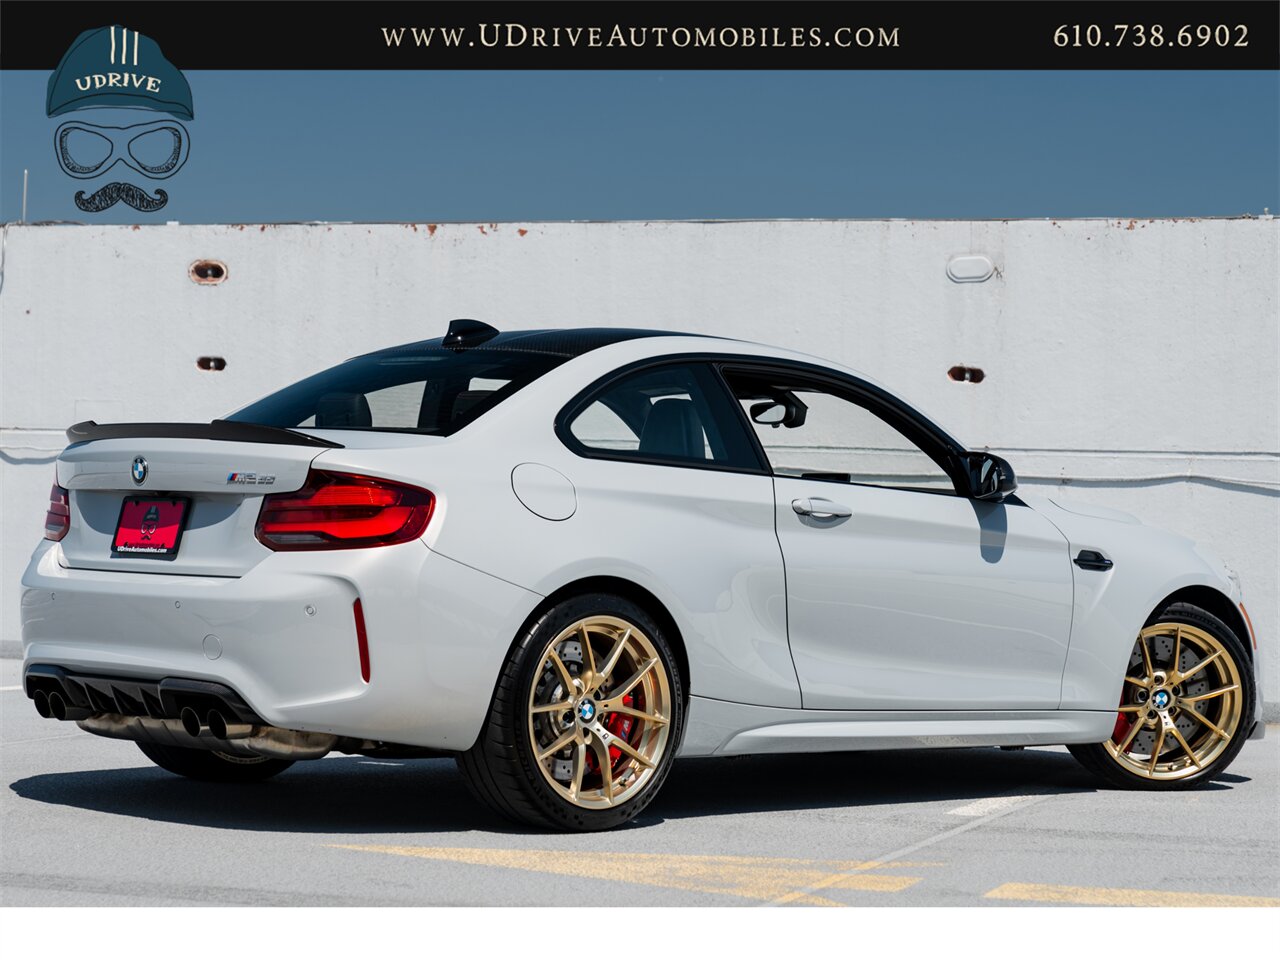 2020 BMW M2 CS  M2 CS 6 Speed Manual 2k Miles Full Body PPF Factory Warranty until 2025 - Photo 2 - West Chester, PA 19382